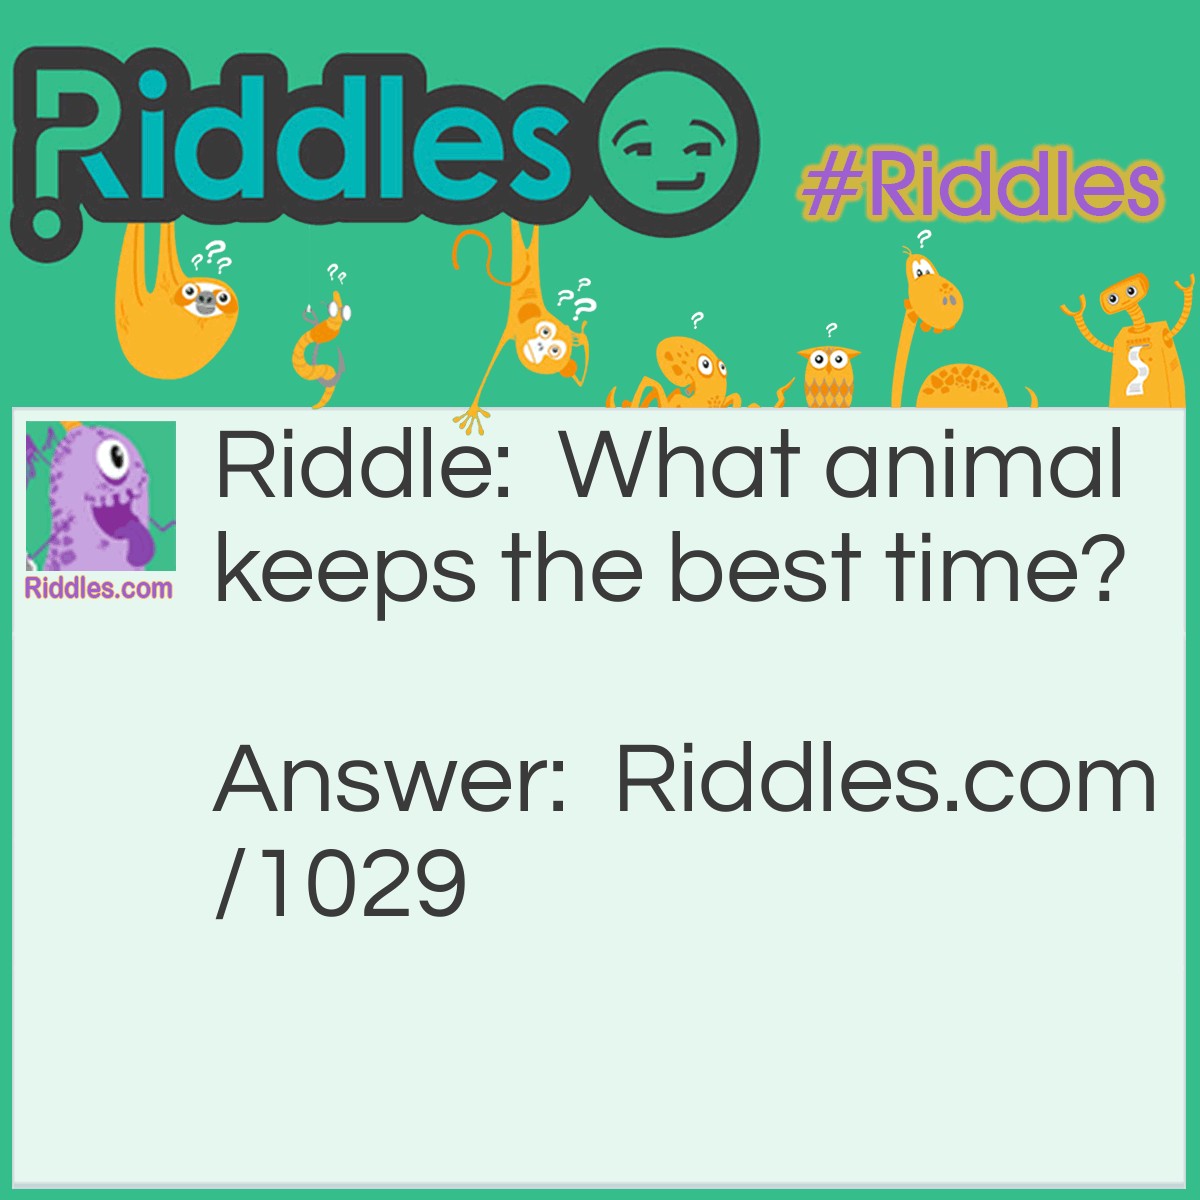 Riddle: What animal keeps the best time? Answer: A Watchdog